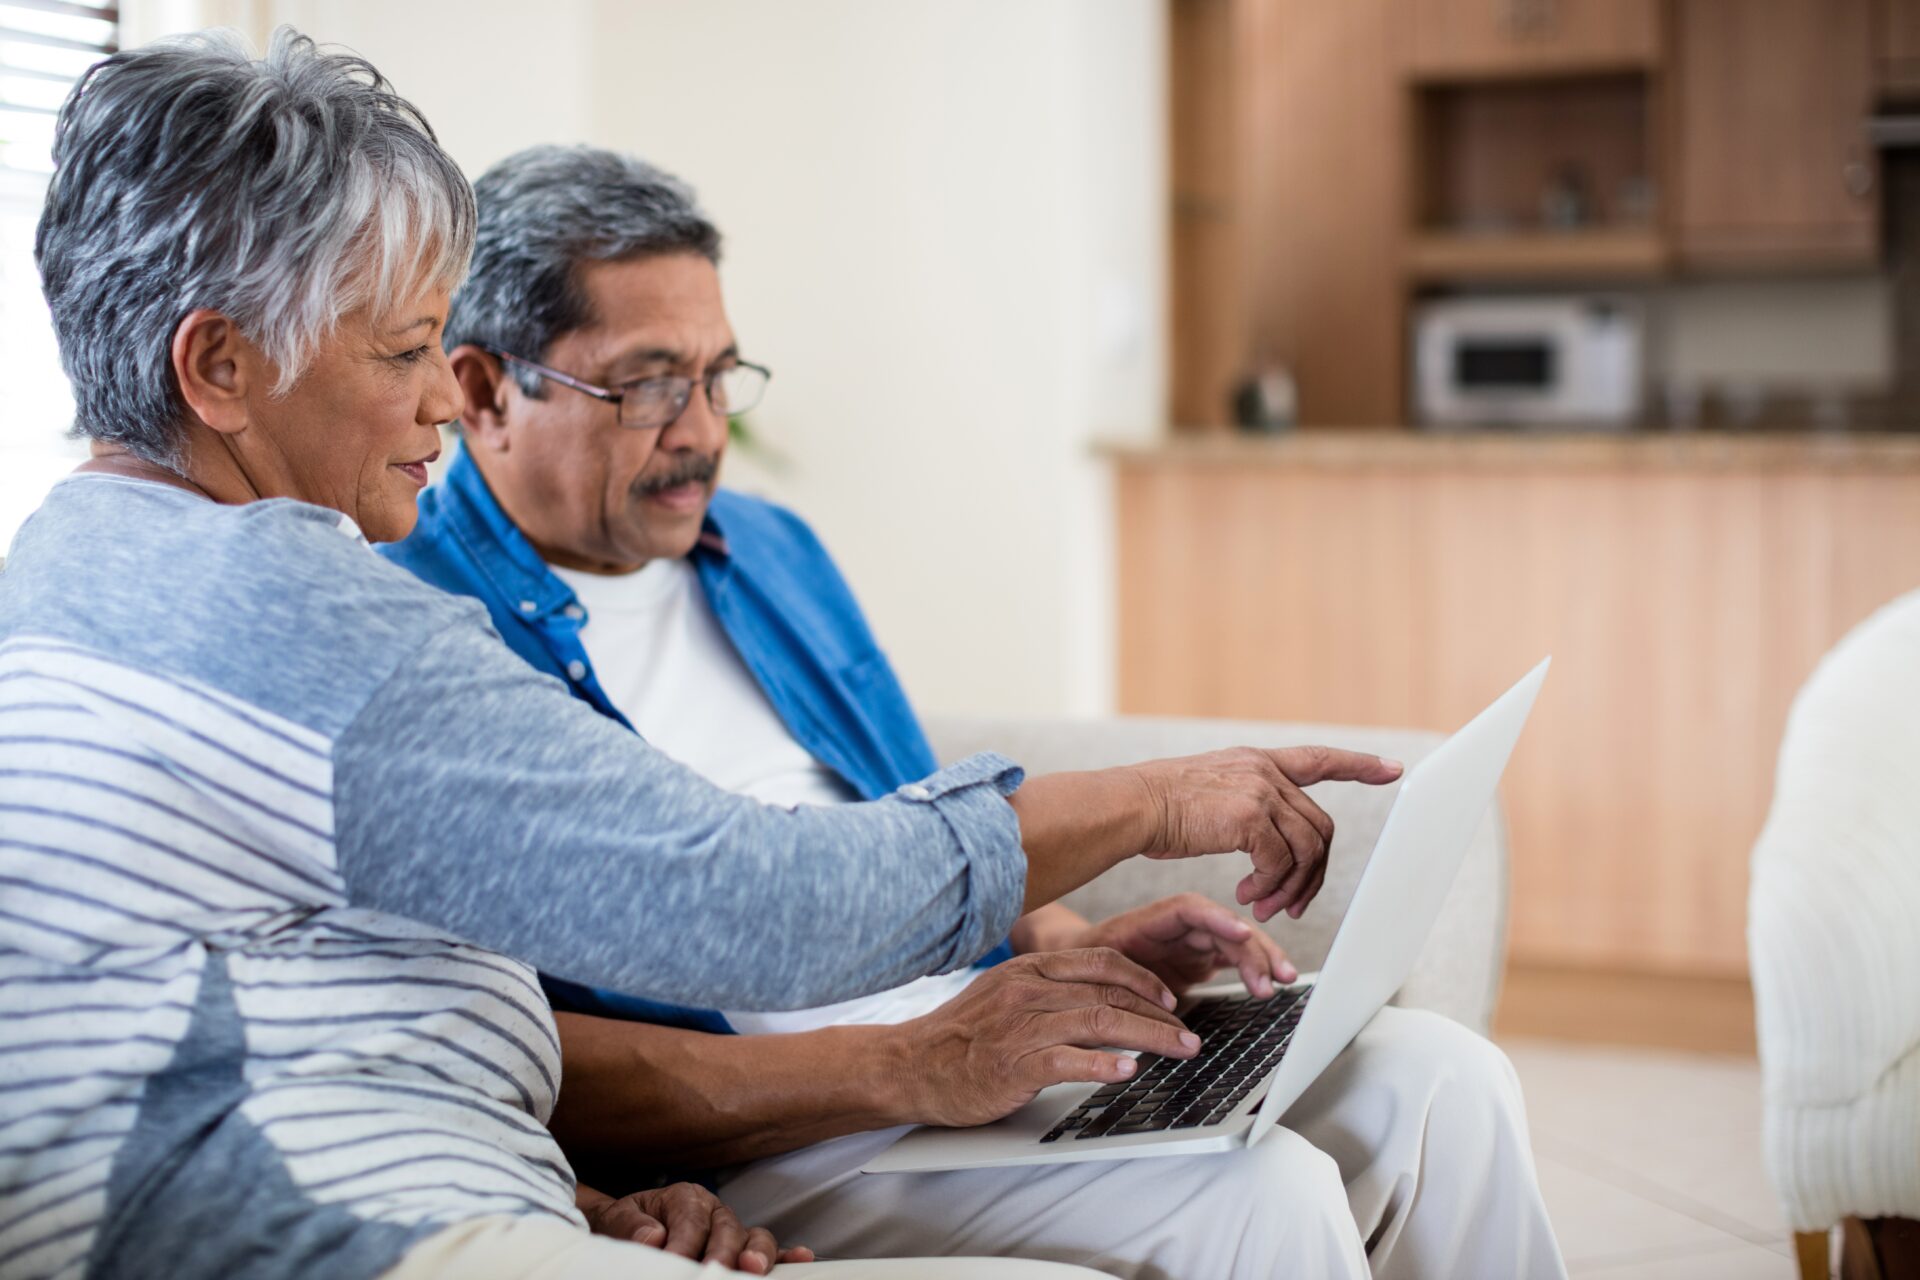 Senior man and woman reviewing information on a laptop.